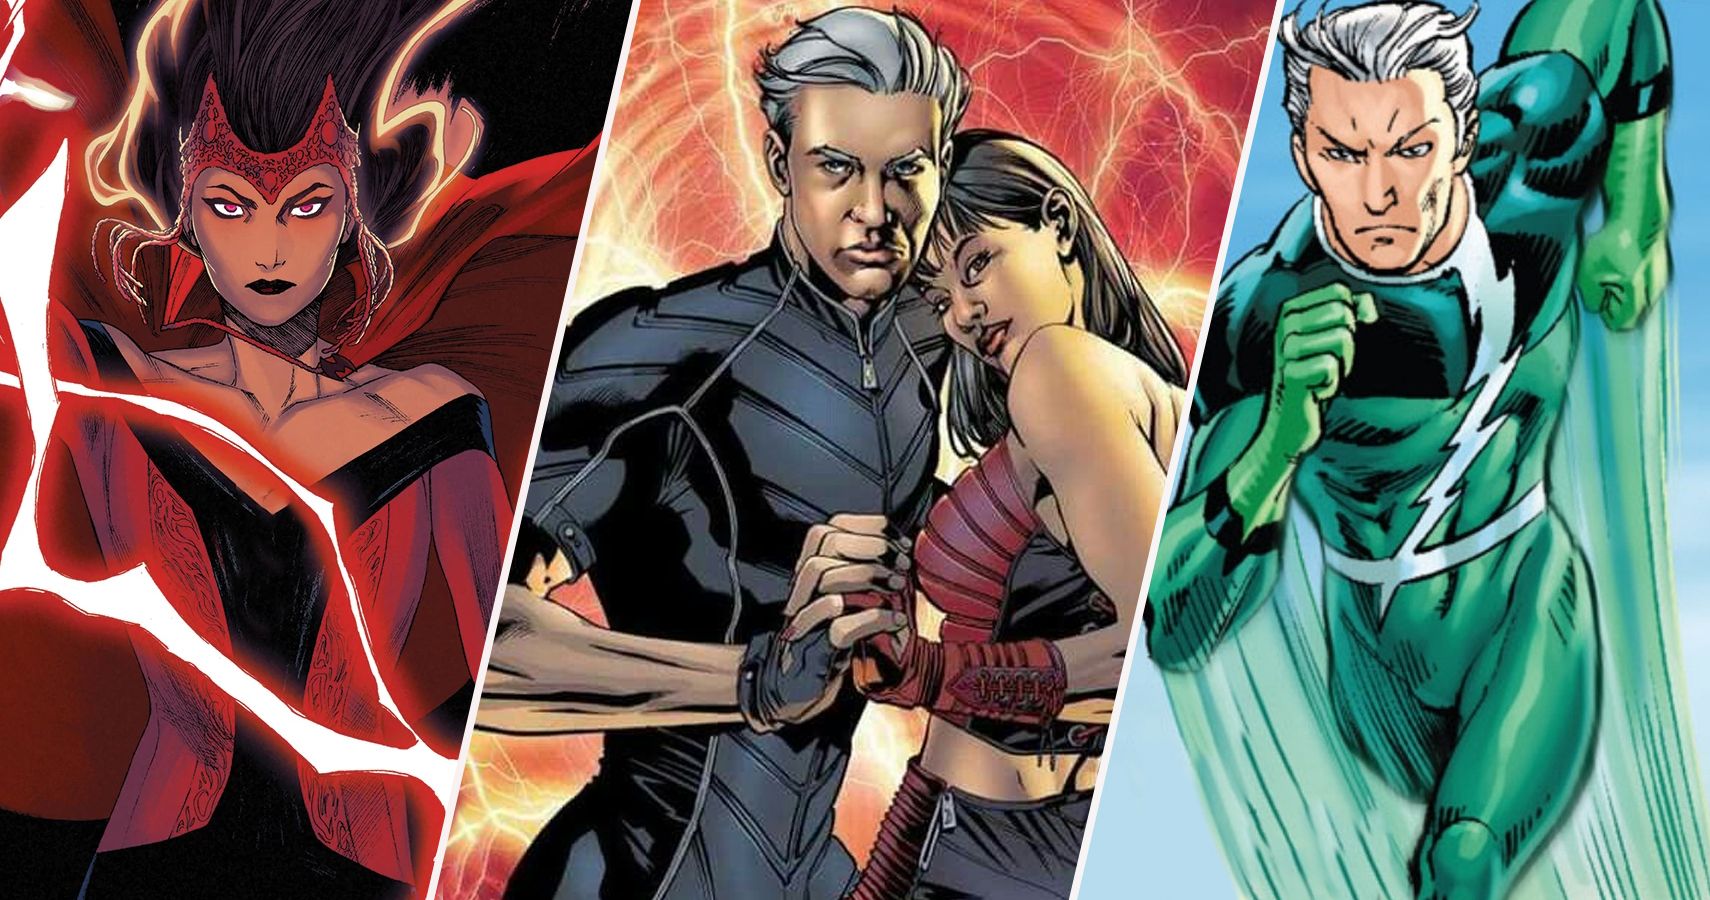 Scarlet Witch's brother Quicksilver and WandaVision, explained - Polygon